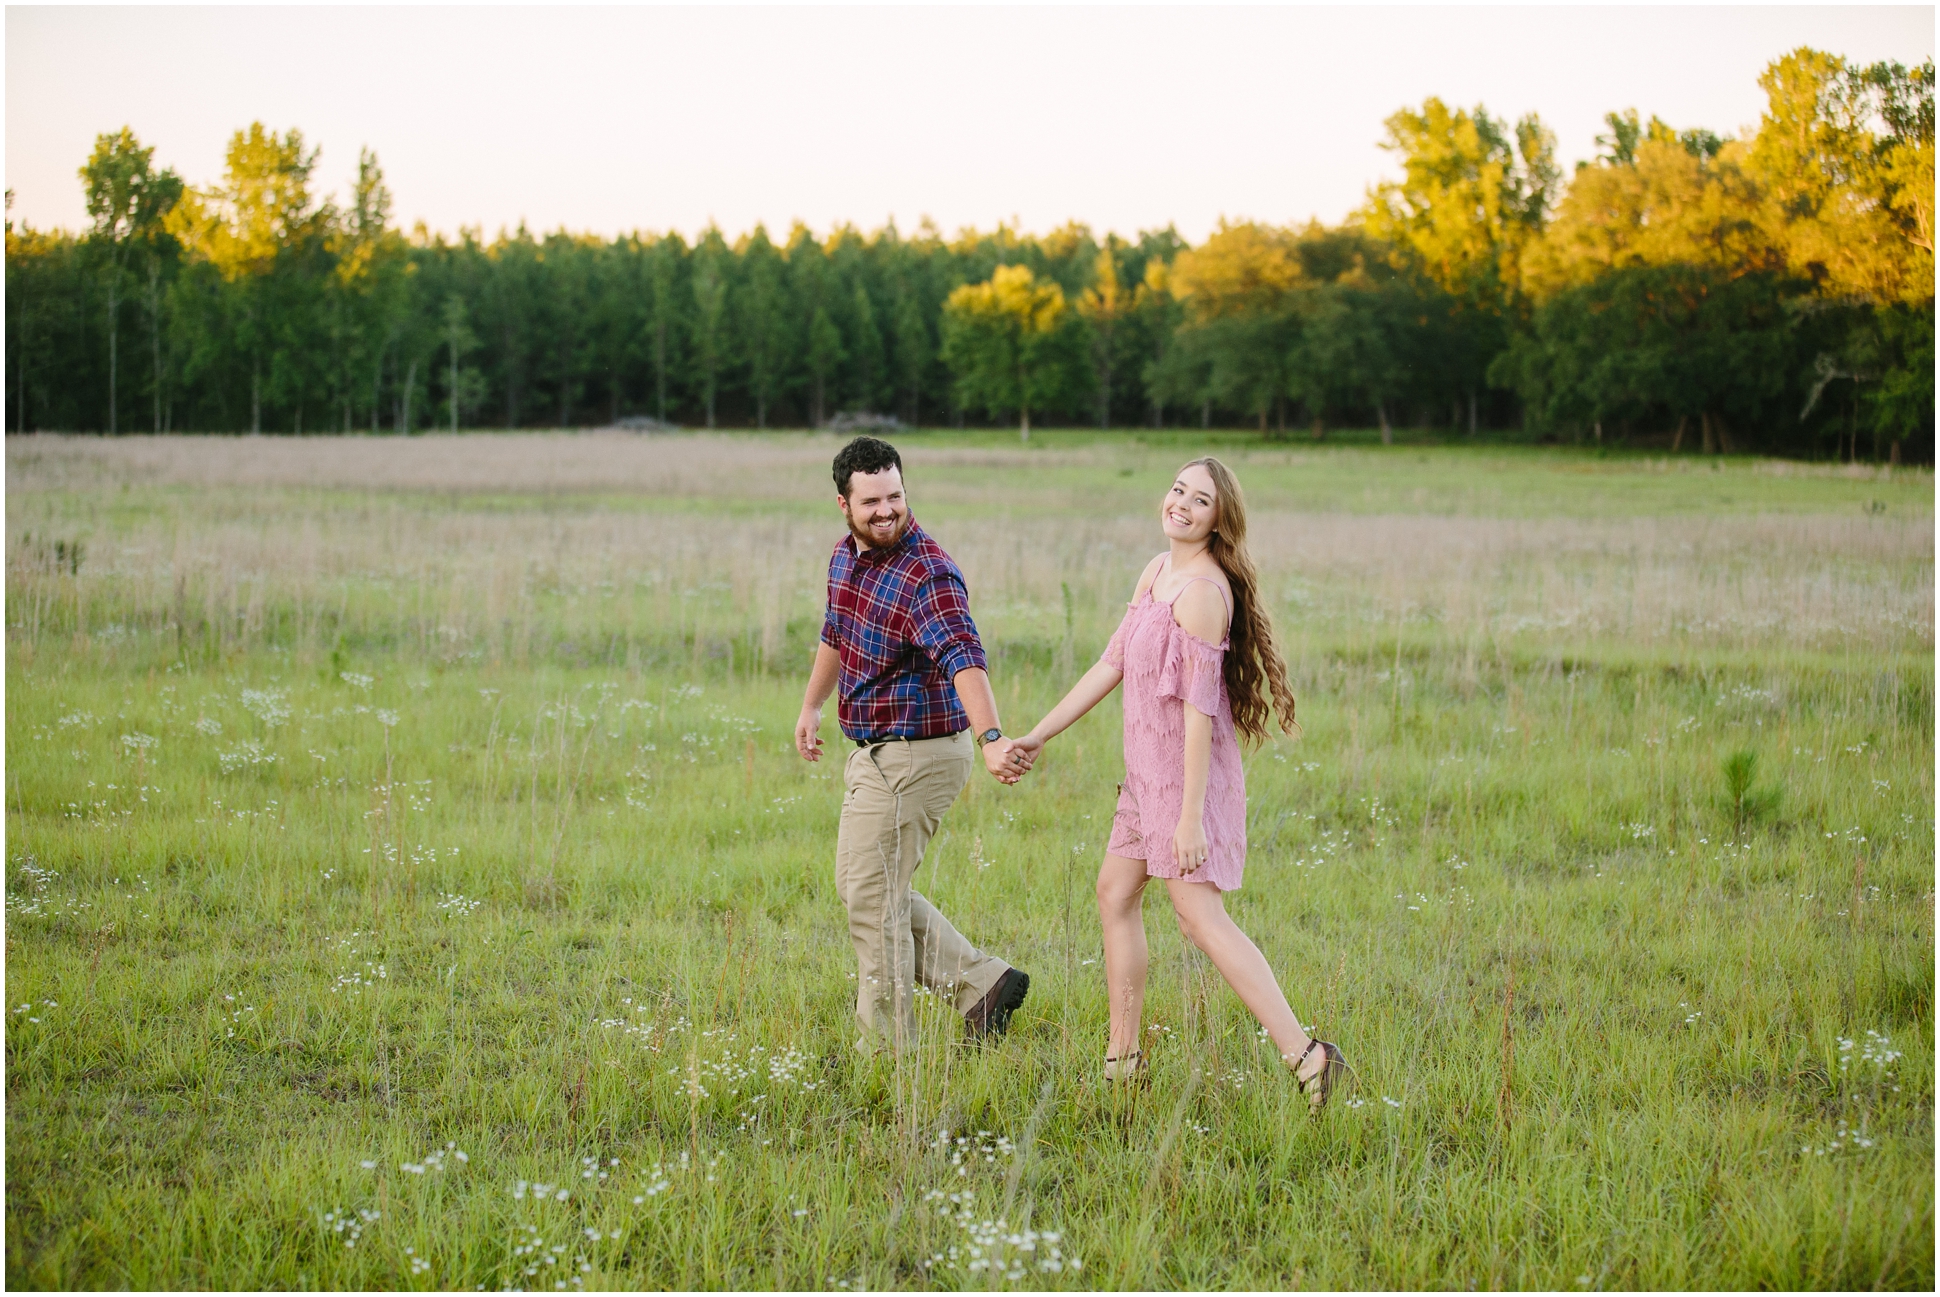 Two Chics Photography | A Countryside Engagement Session | www.twochicsphotography.com